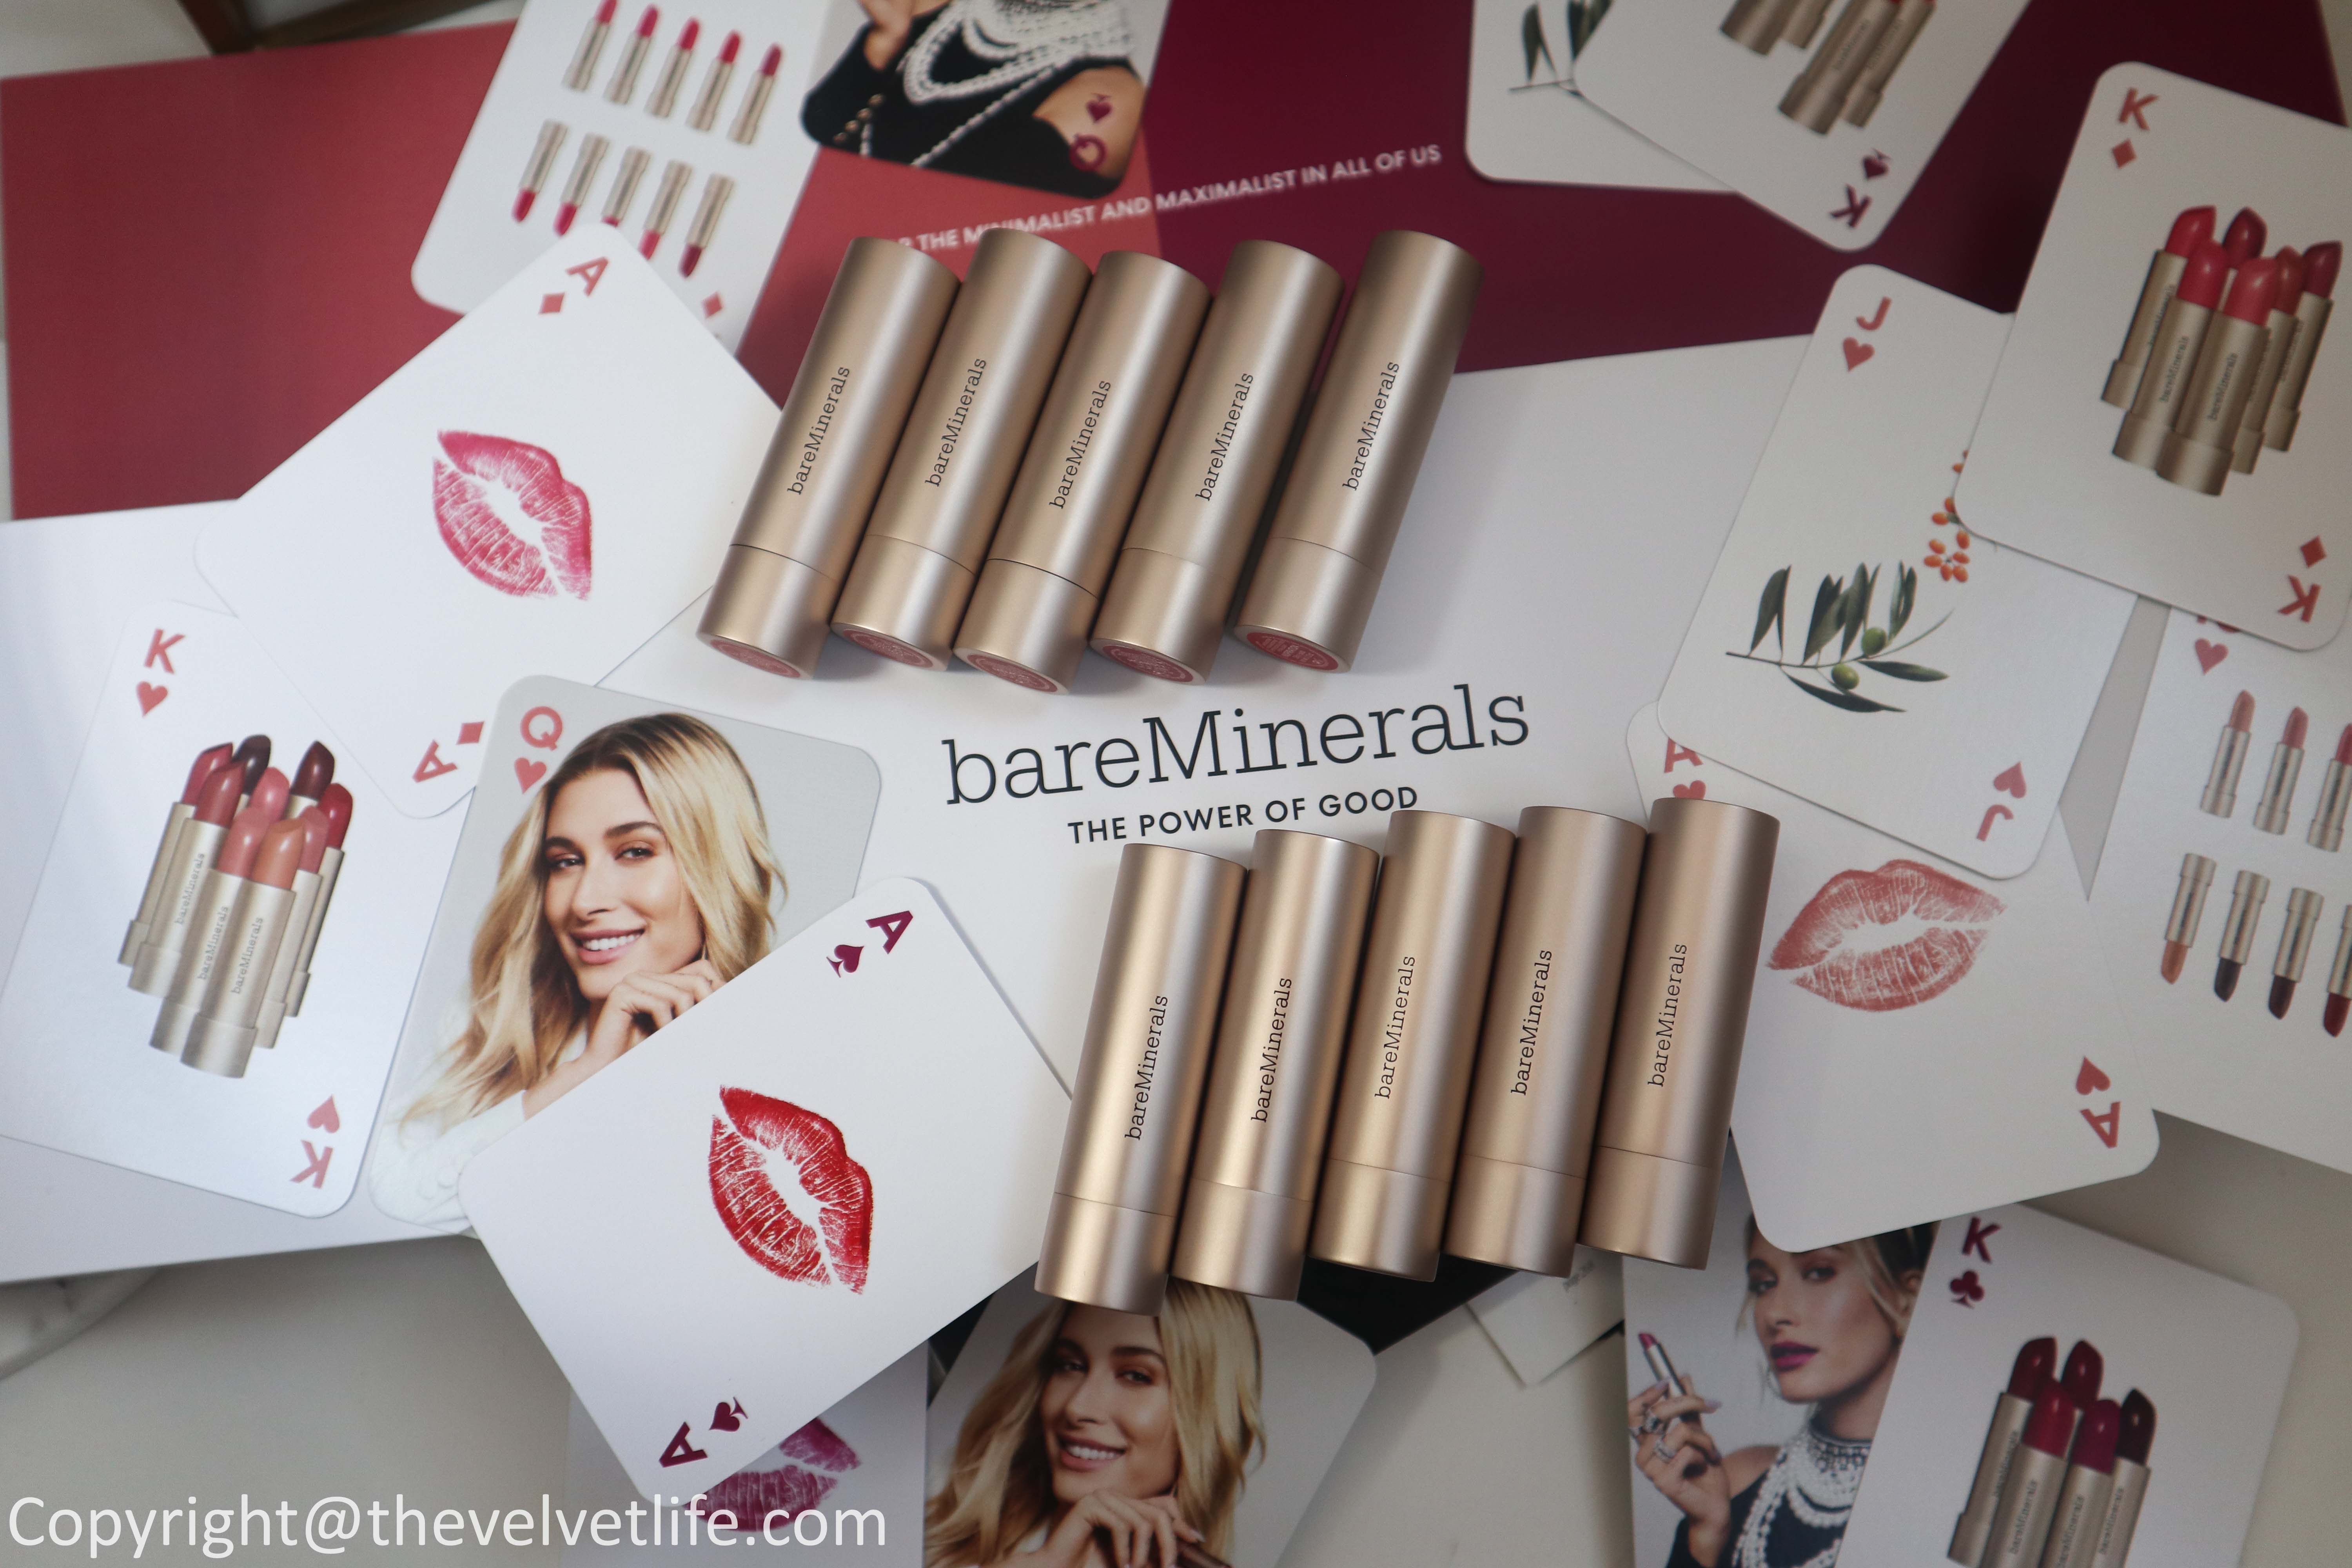 Review and swatches of the new bareMinerals Mineralist Hydra-Smoothing Lipstick